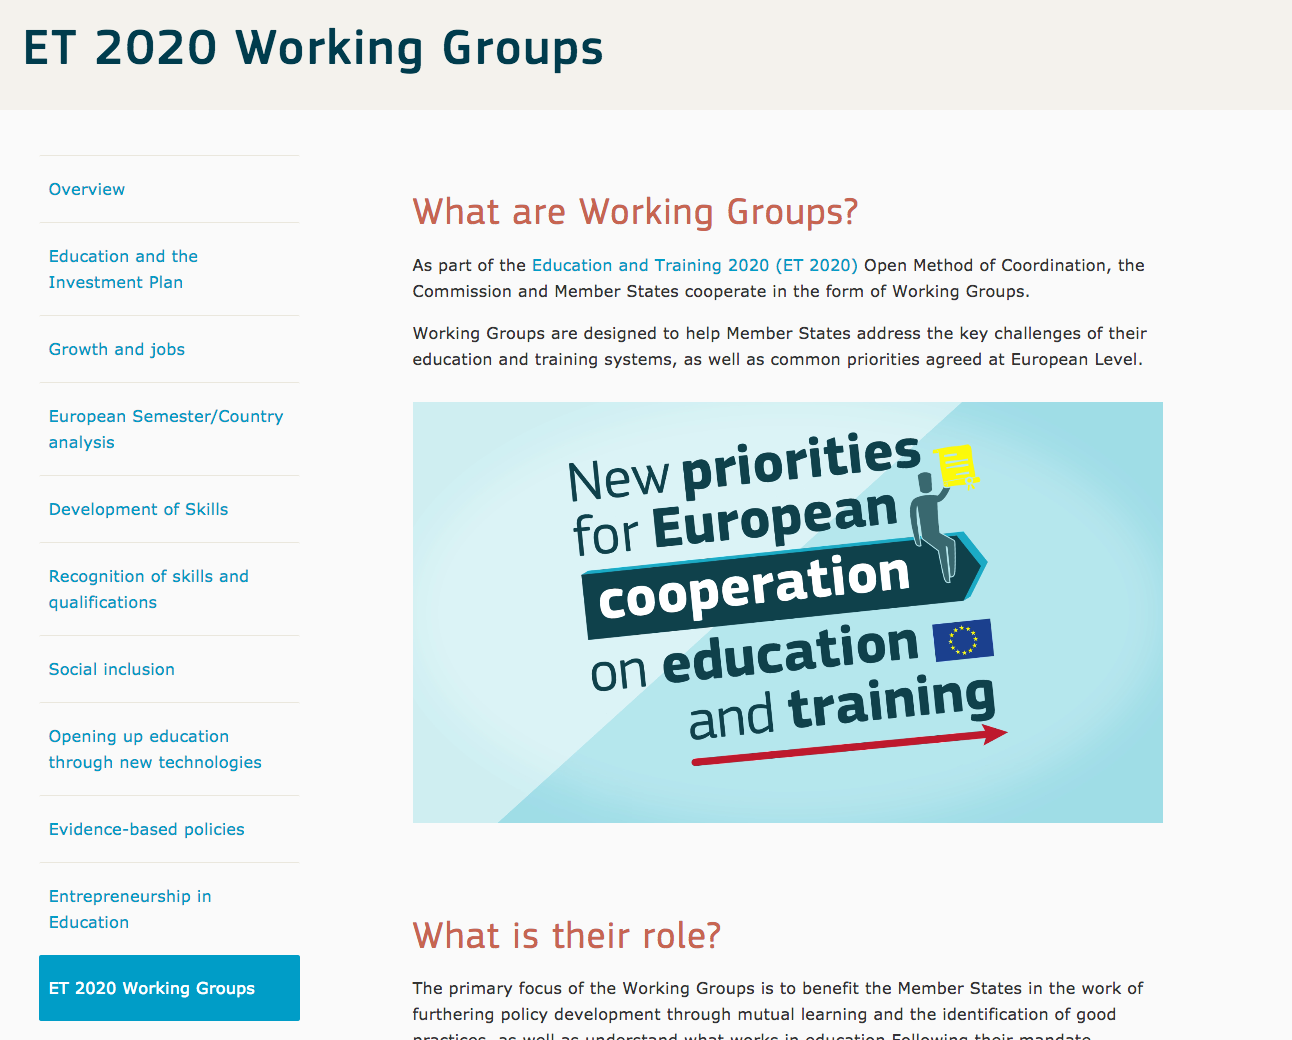 Agency Participation in the Education and Training 2020 Working Group